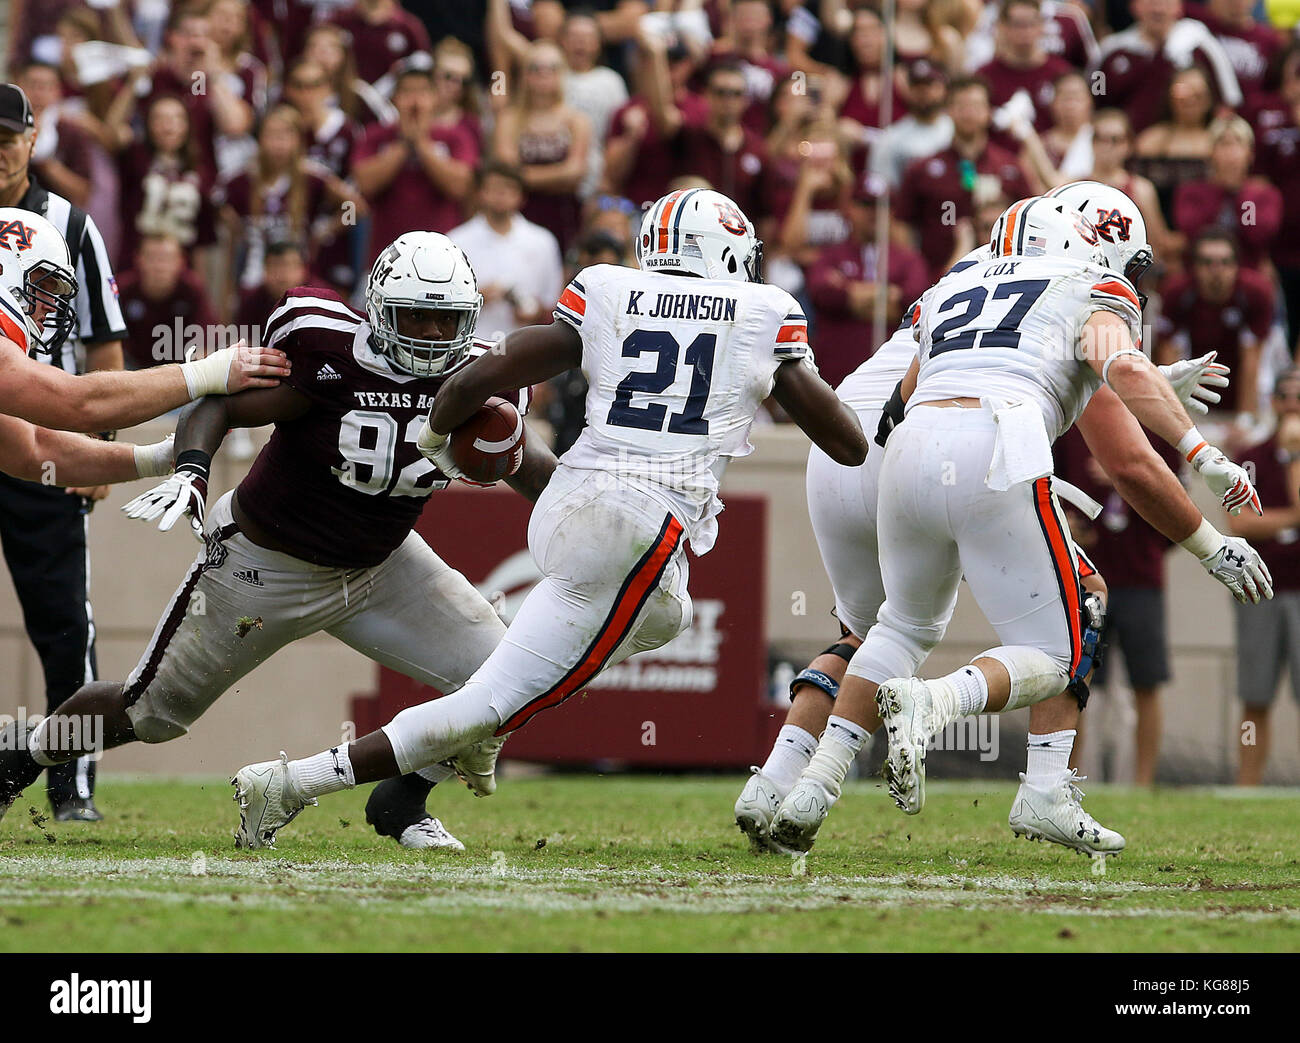 November 4, 2017: Auburn Tigers running back Kerryon Johnson (21) rushes for yards while being pursued by Texas A&M Aggies defensive lineman Zaycoven Henderson (92) in the third quarter during the NCAA football game between the Auburn Tigers and the Texas A&M Aggies at Kyle Field in College Station, TX; John Glaser/CSM. Stock Photo